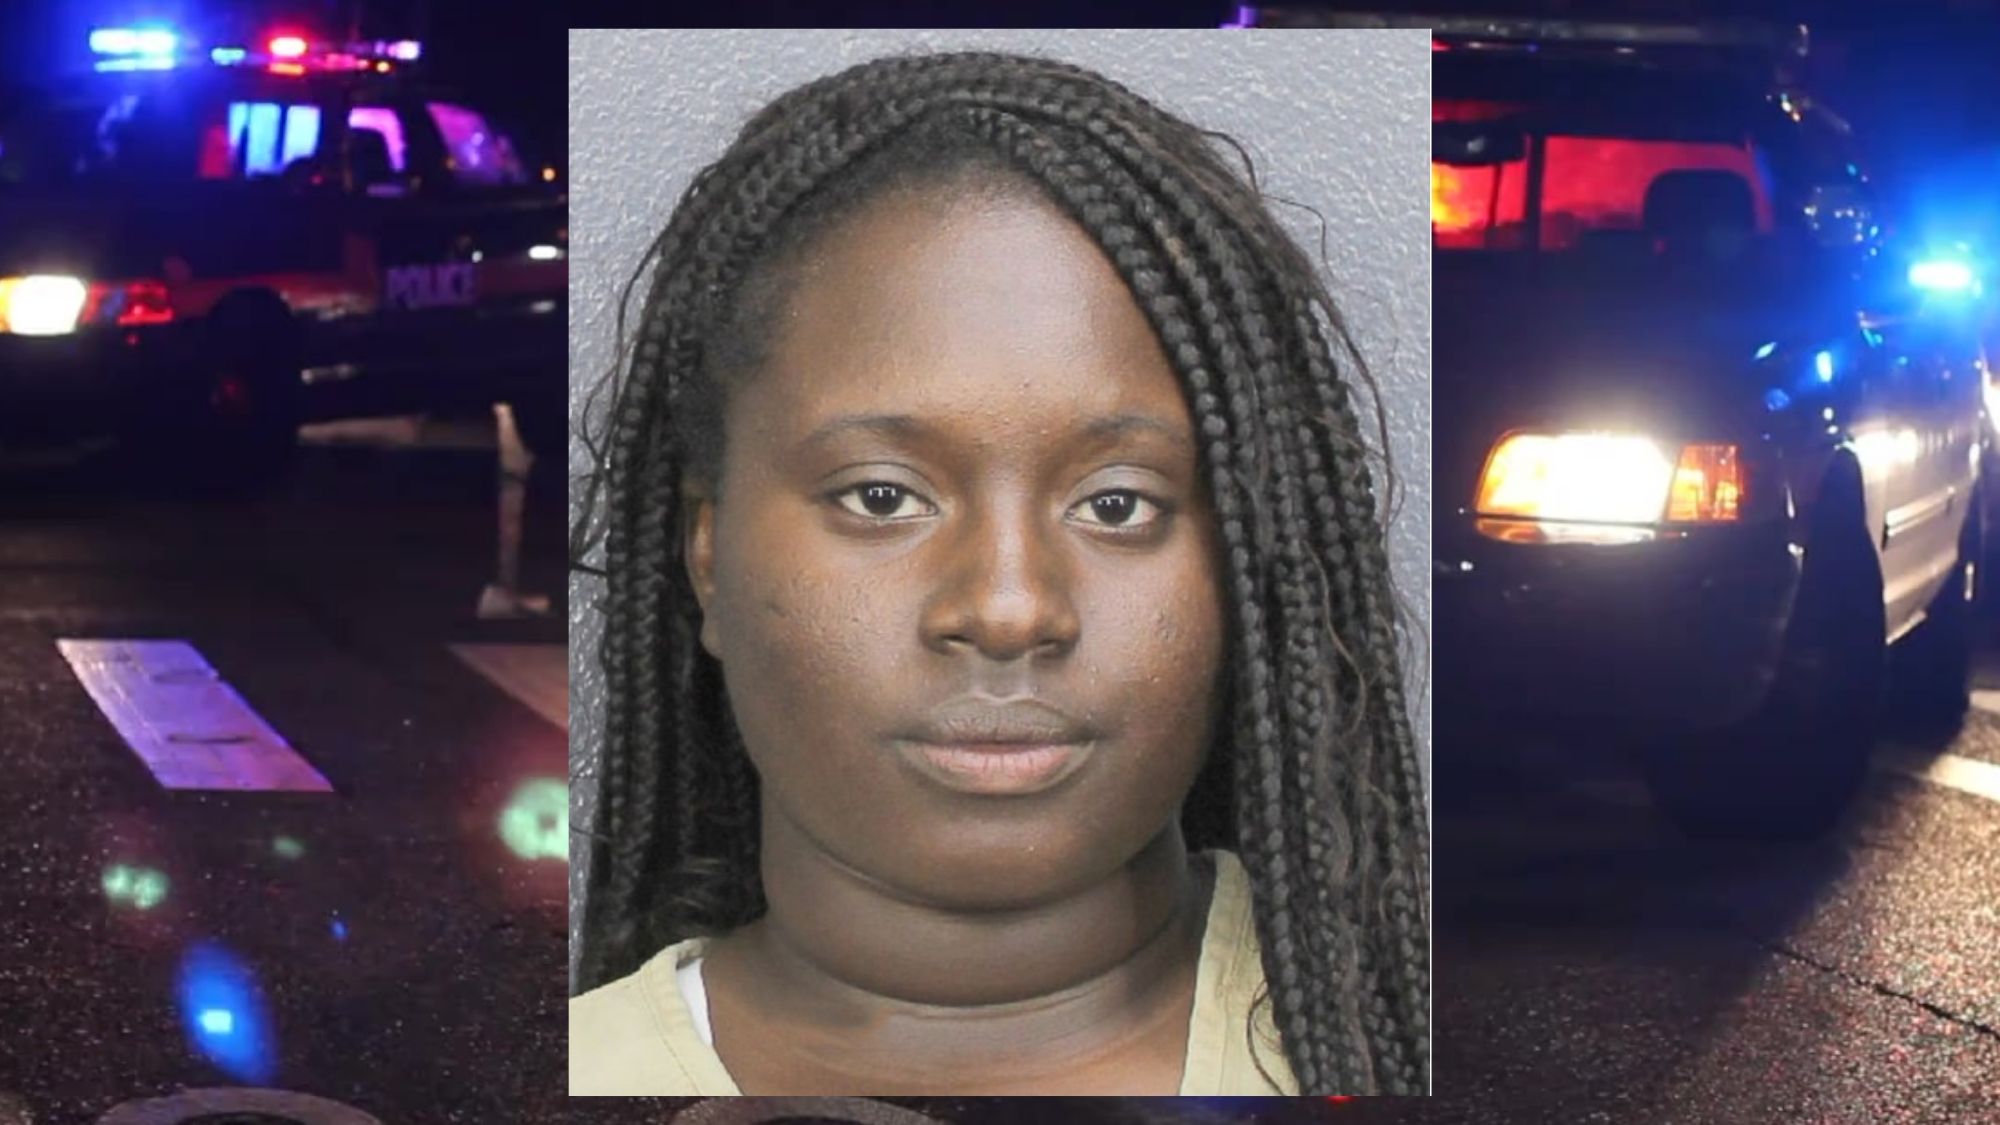 Jealous Rage: Woman Charged With Battery after Hitting Ex-Boyfriend with Car 1